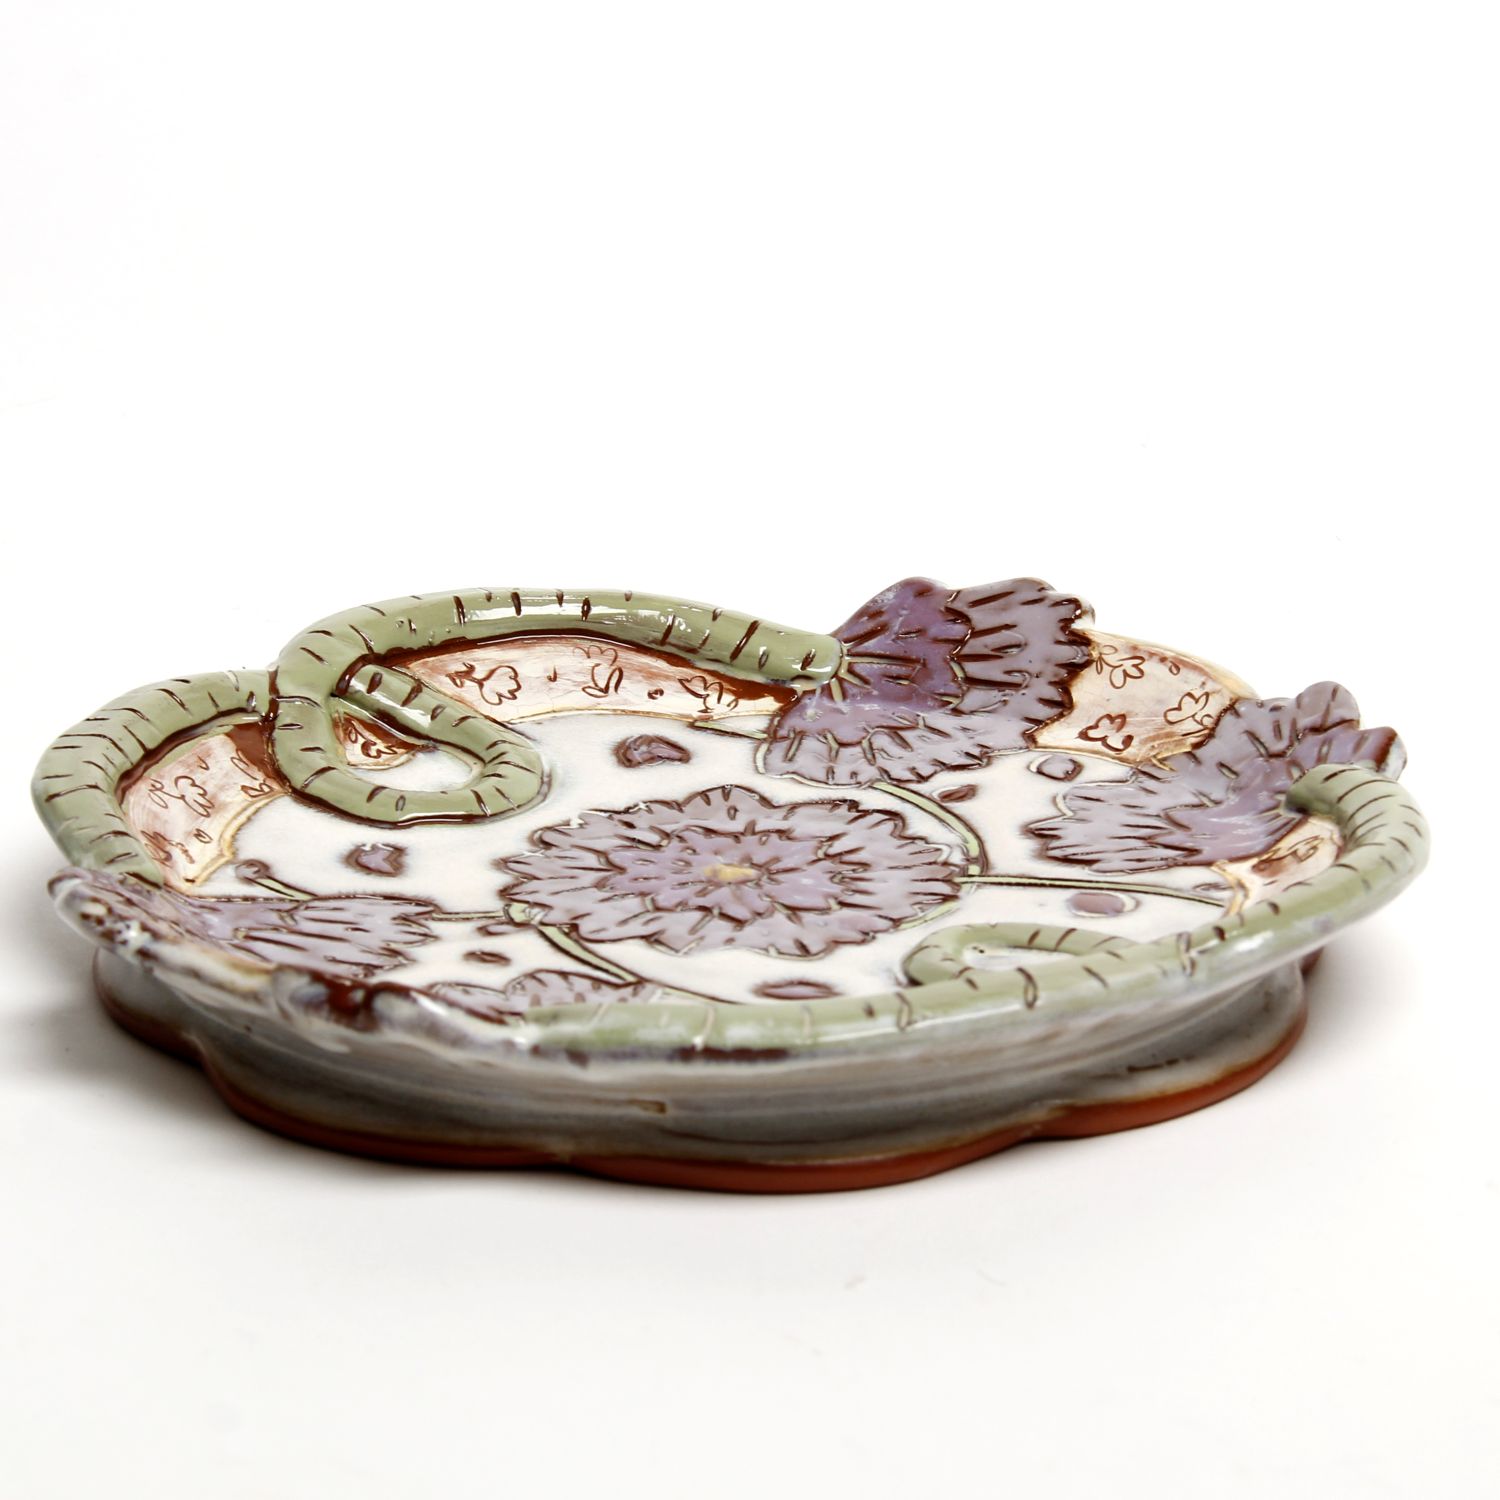 Zoe Pinnell: Purple Flower Plate Product Image 2 of 3